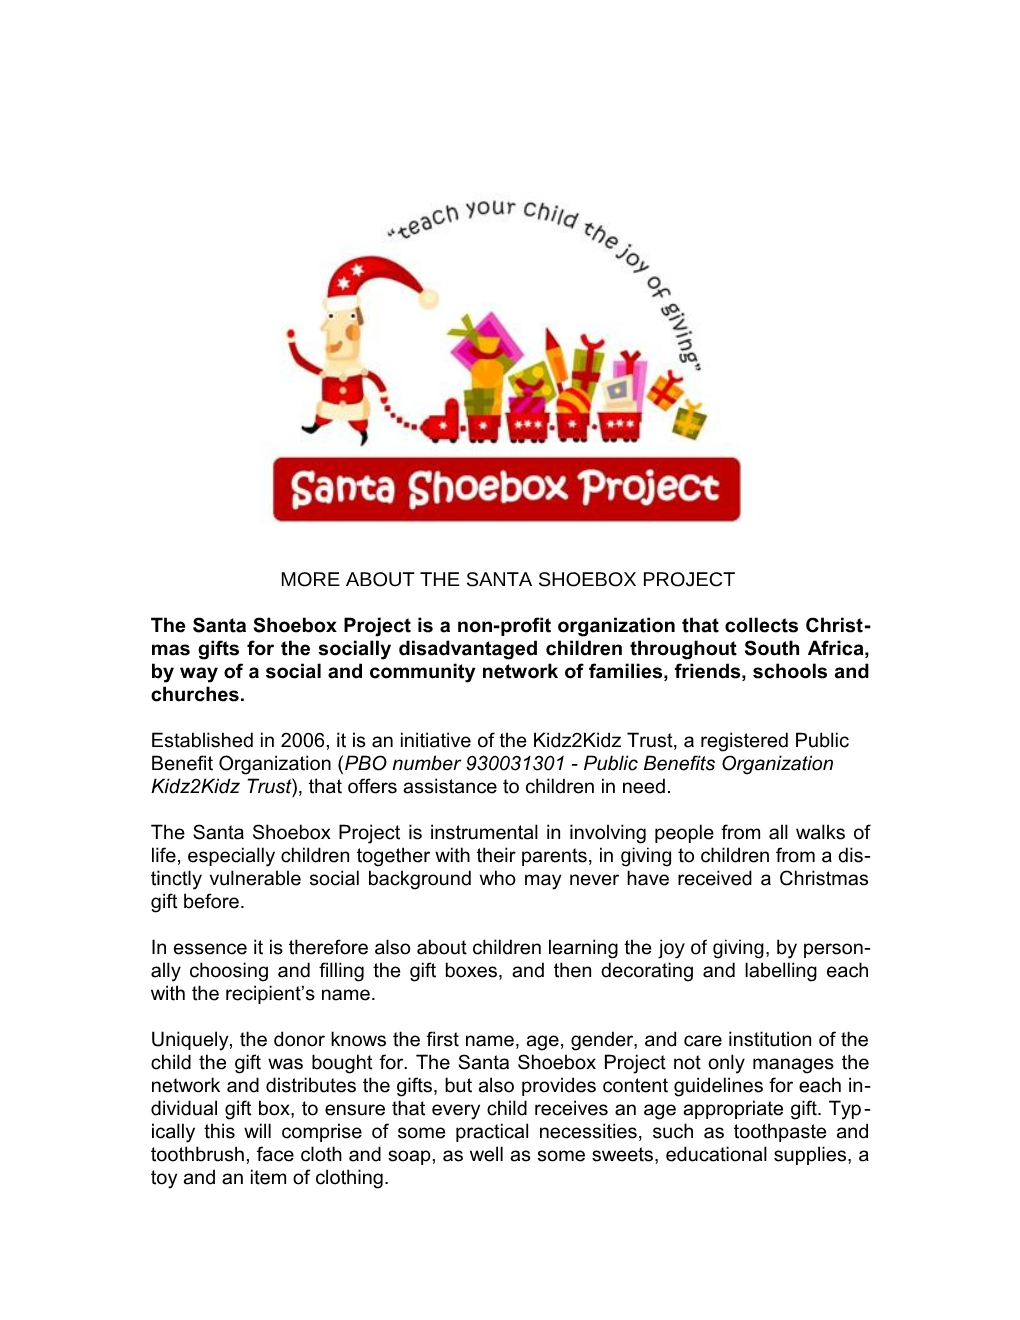 The Santa Shoebox Project Collects Christmas Gifts and Distributes Them to Children Who